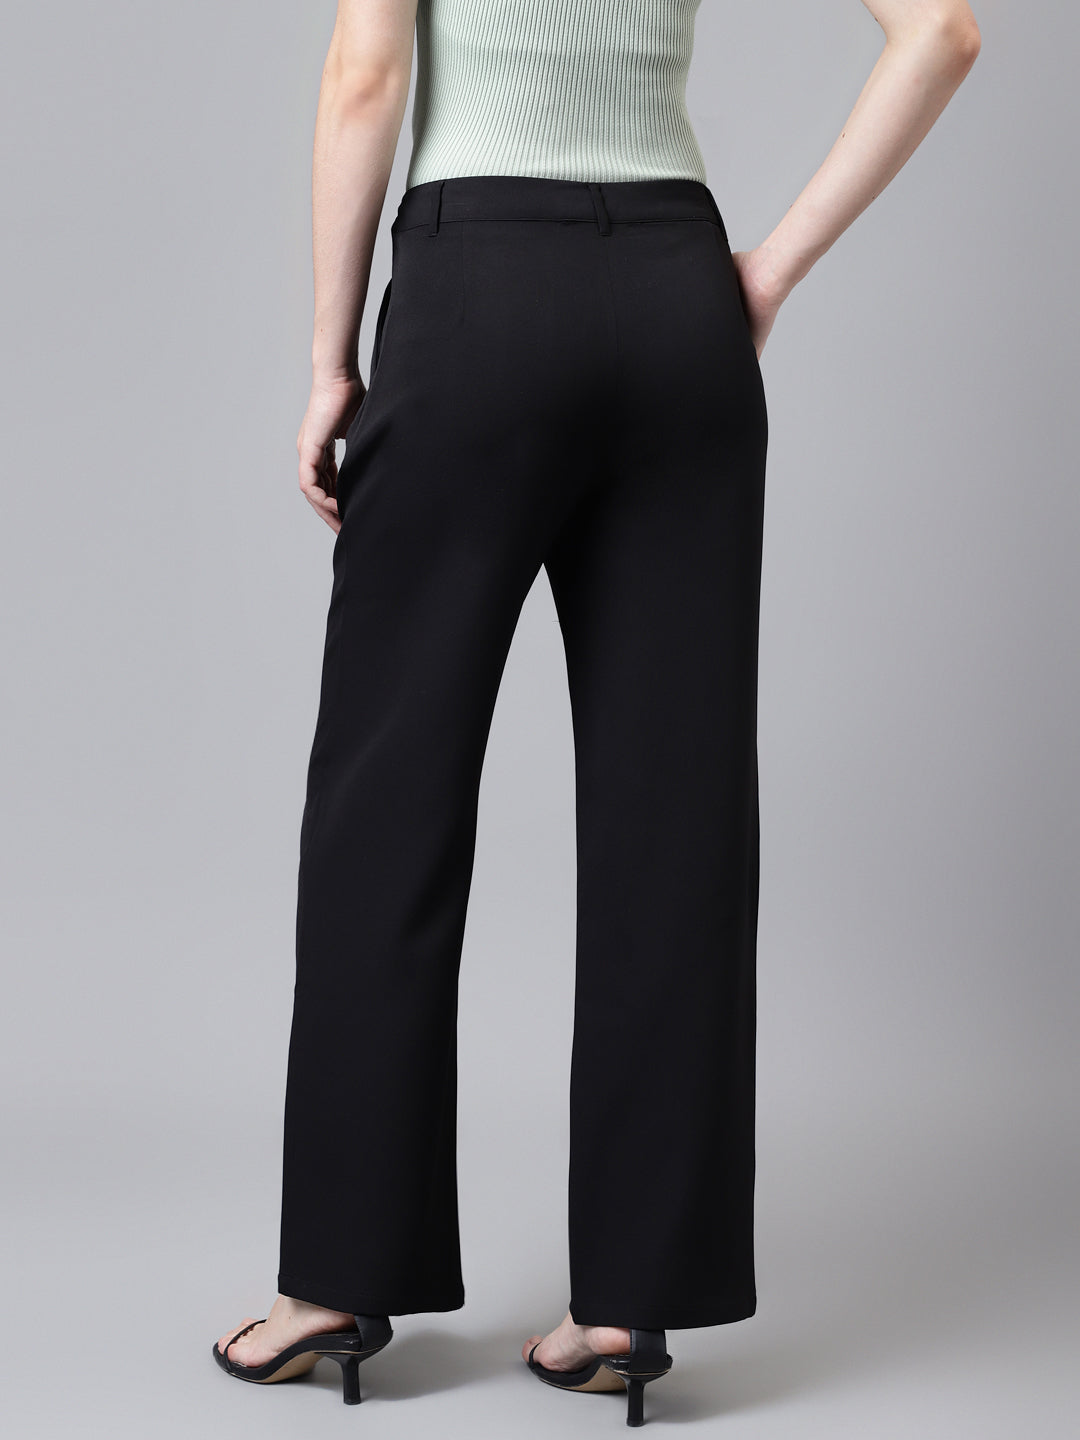 Black Solid Long Straight Pant